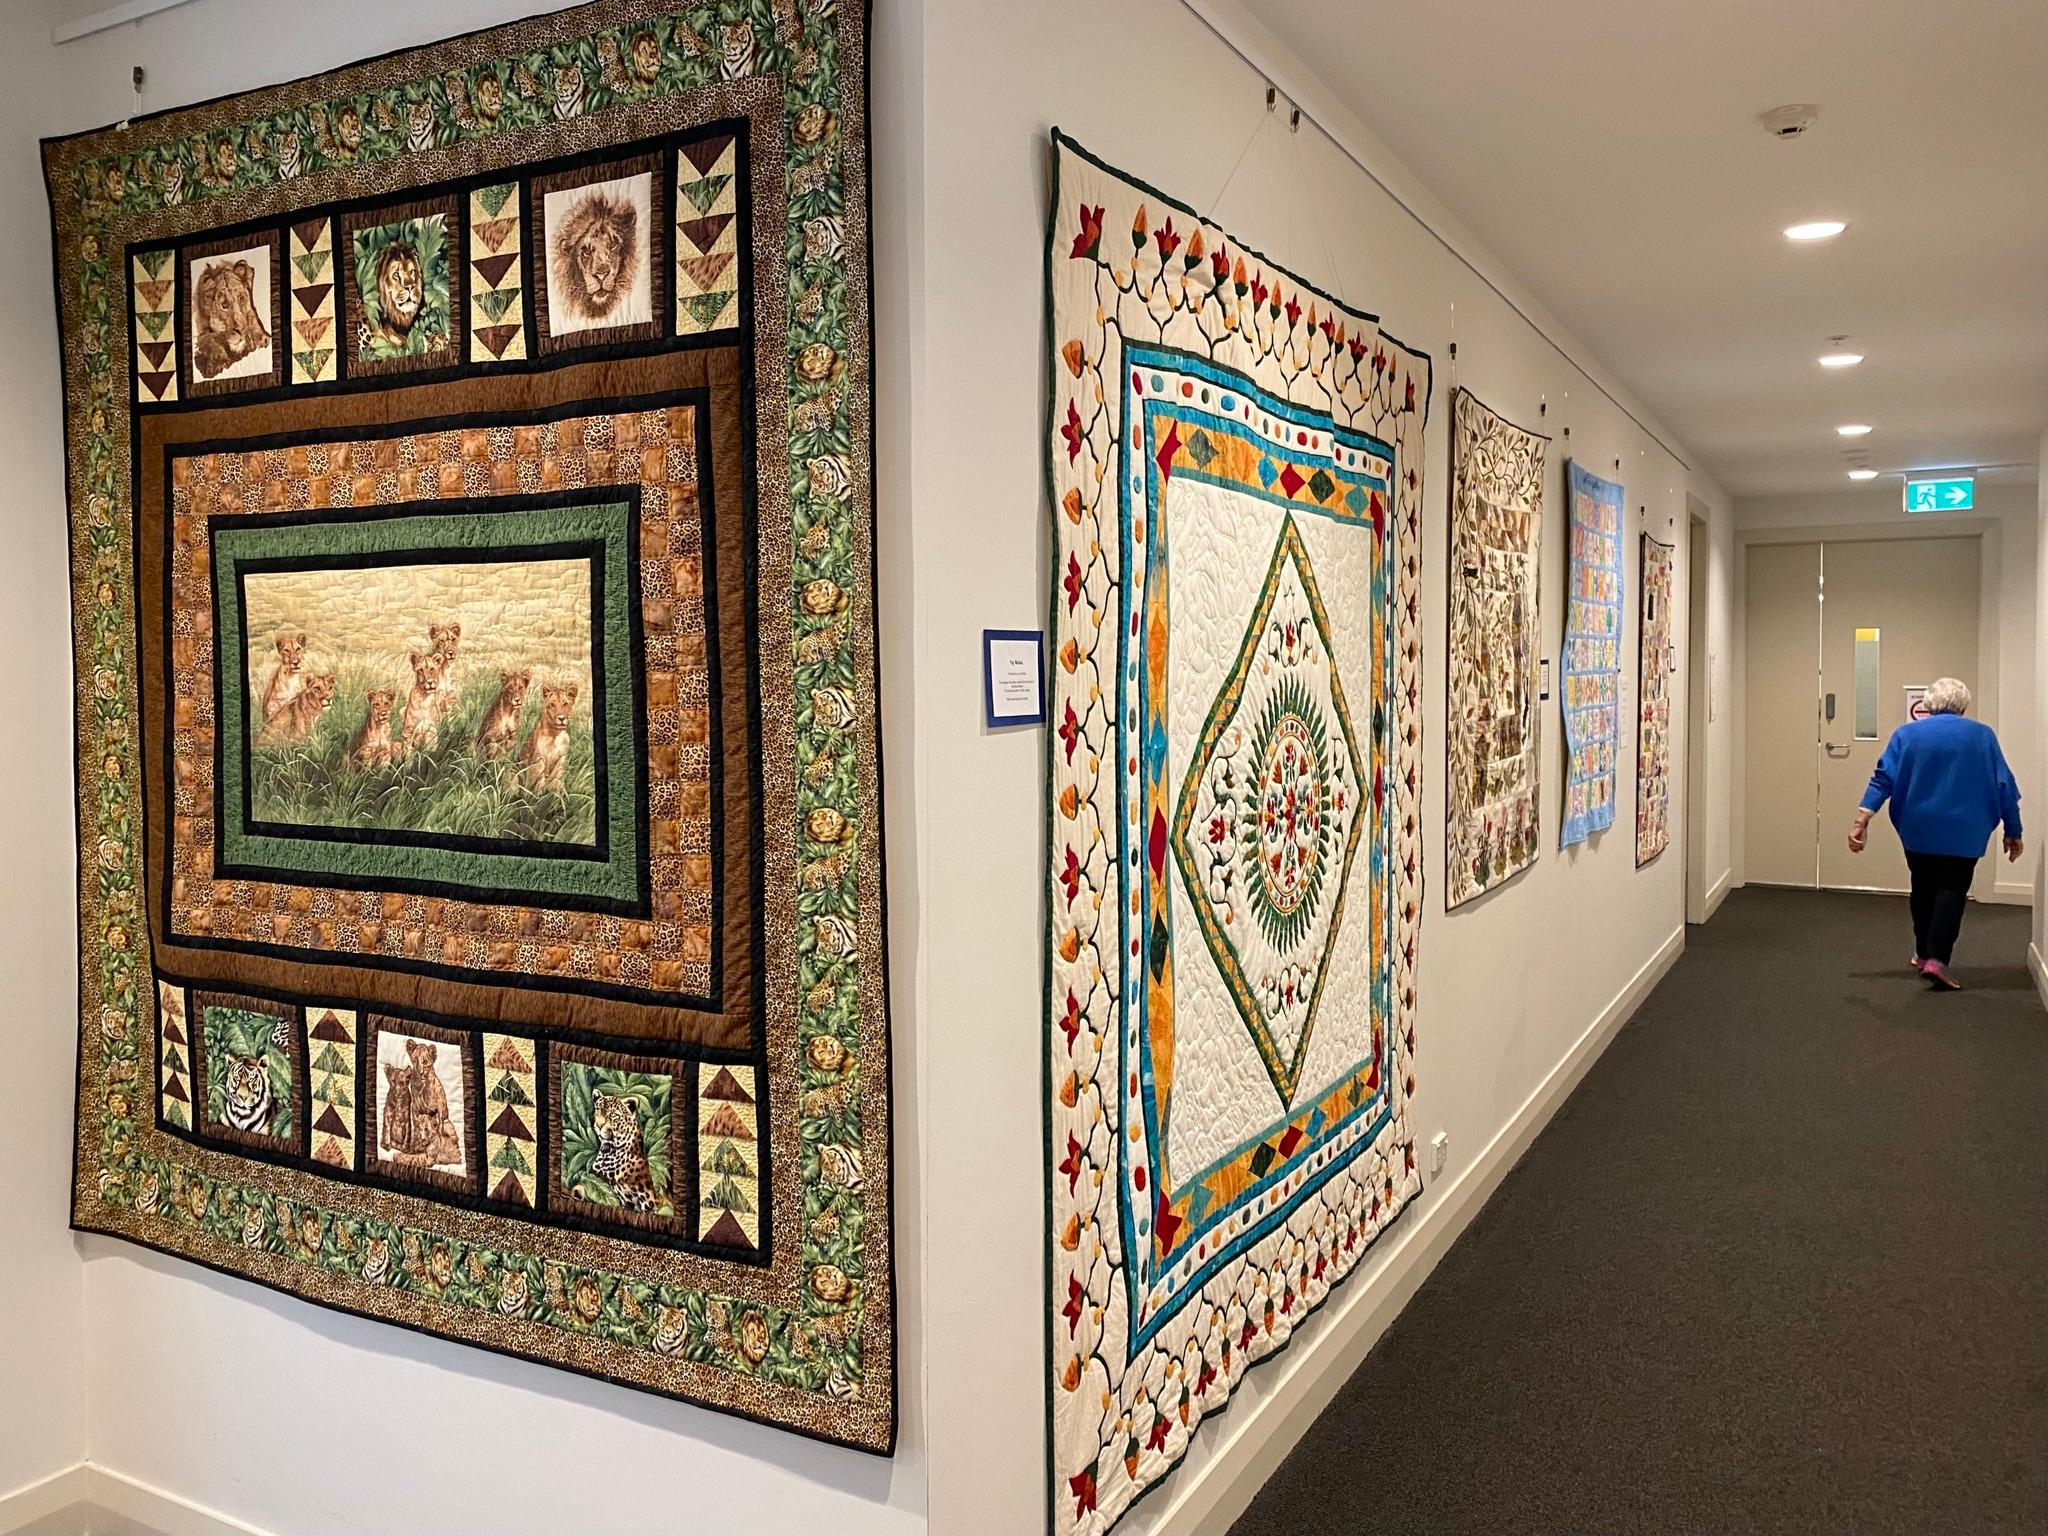 Handmade quilts by Greenwich Gardens residents